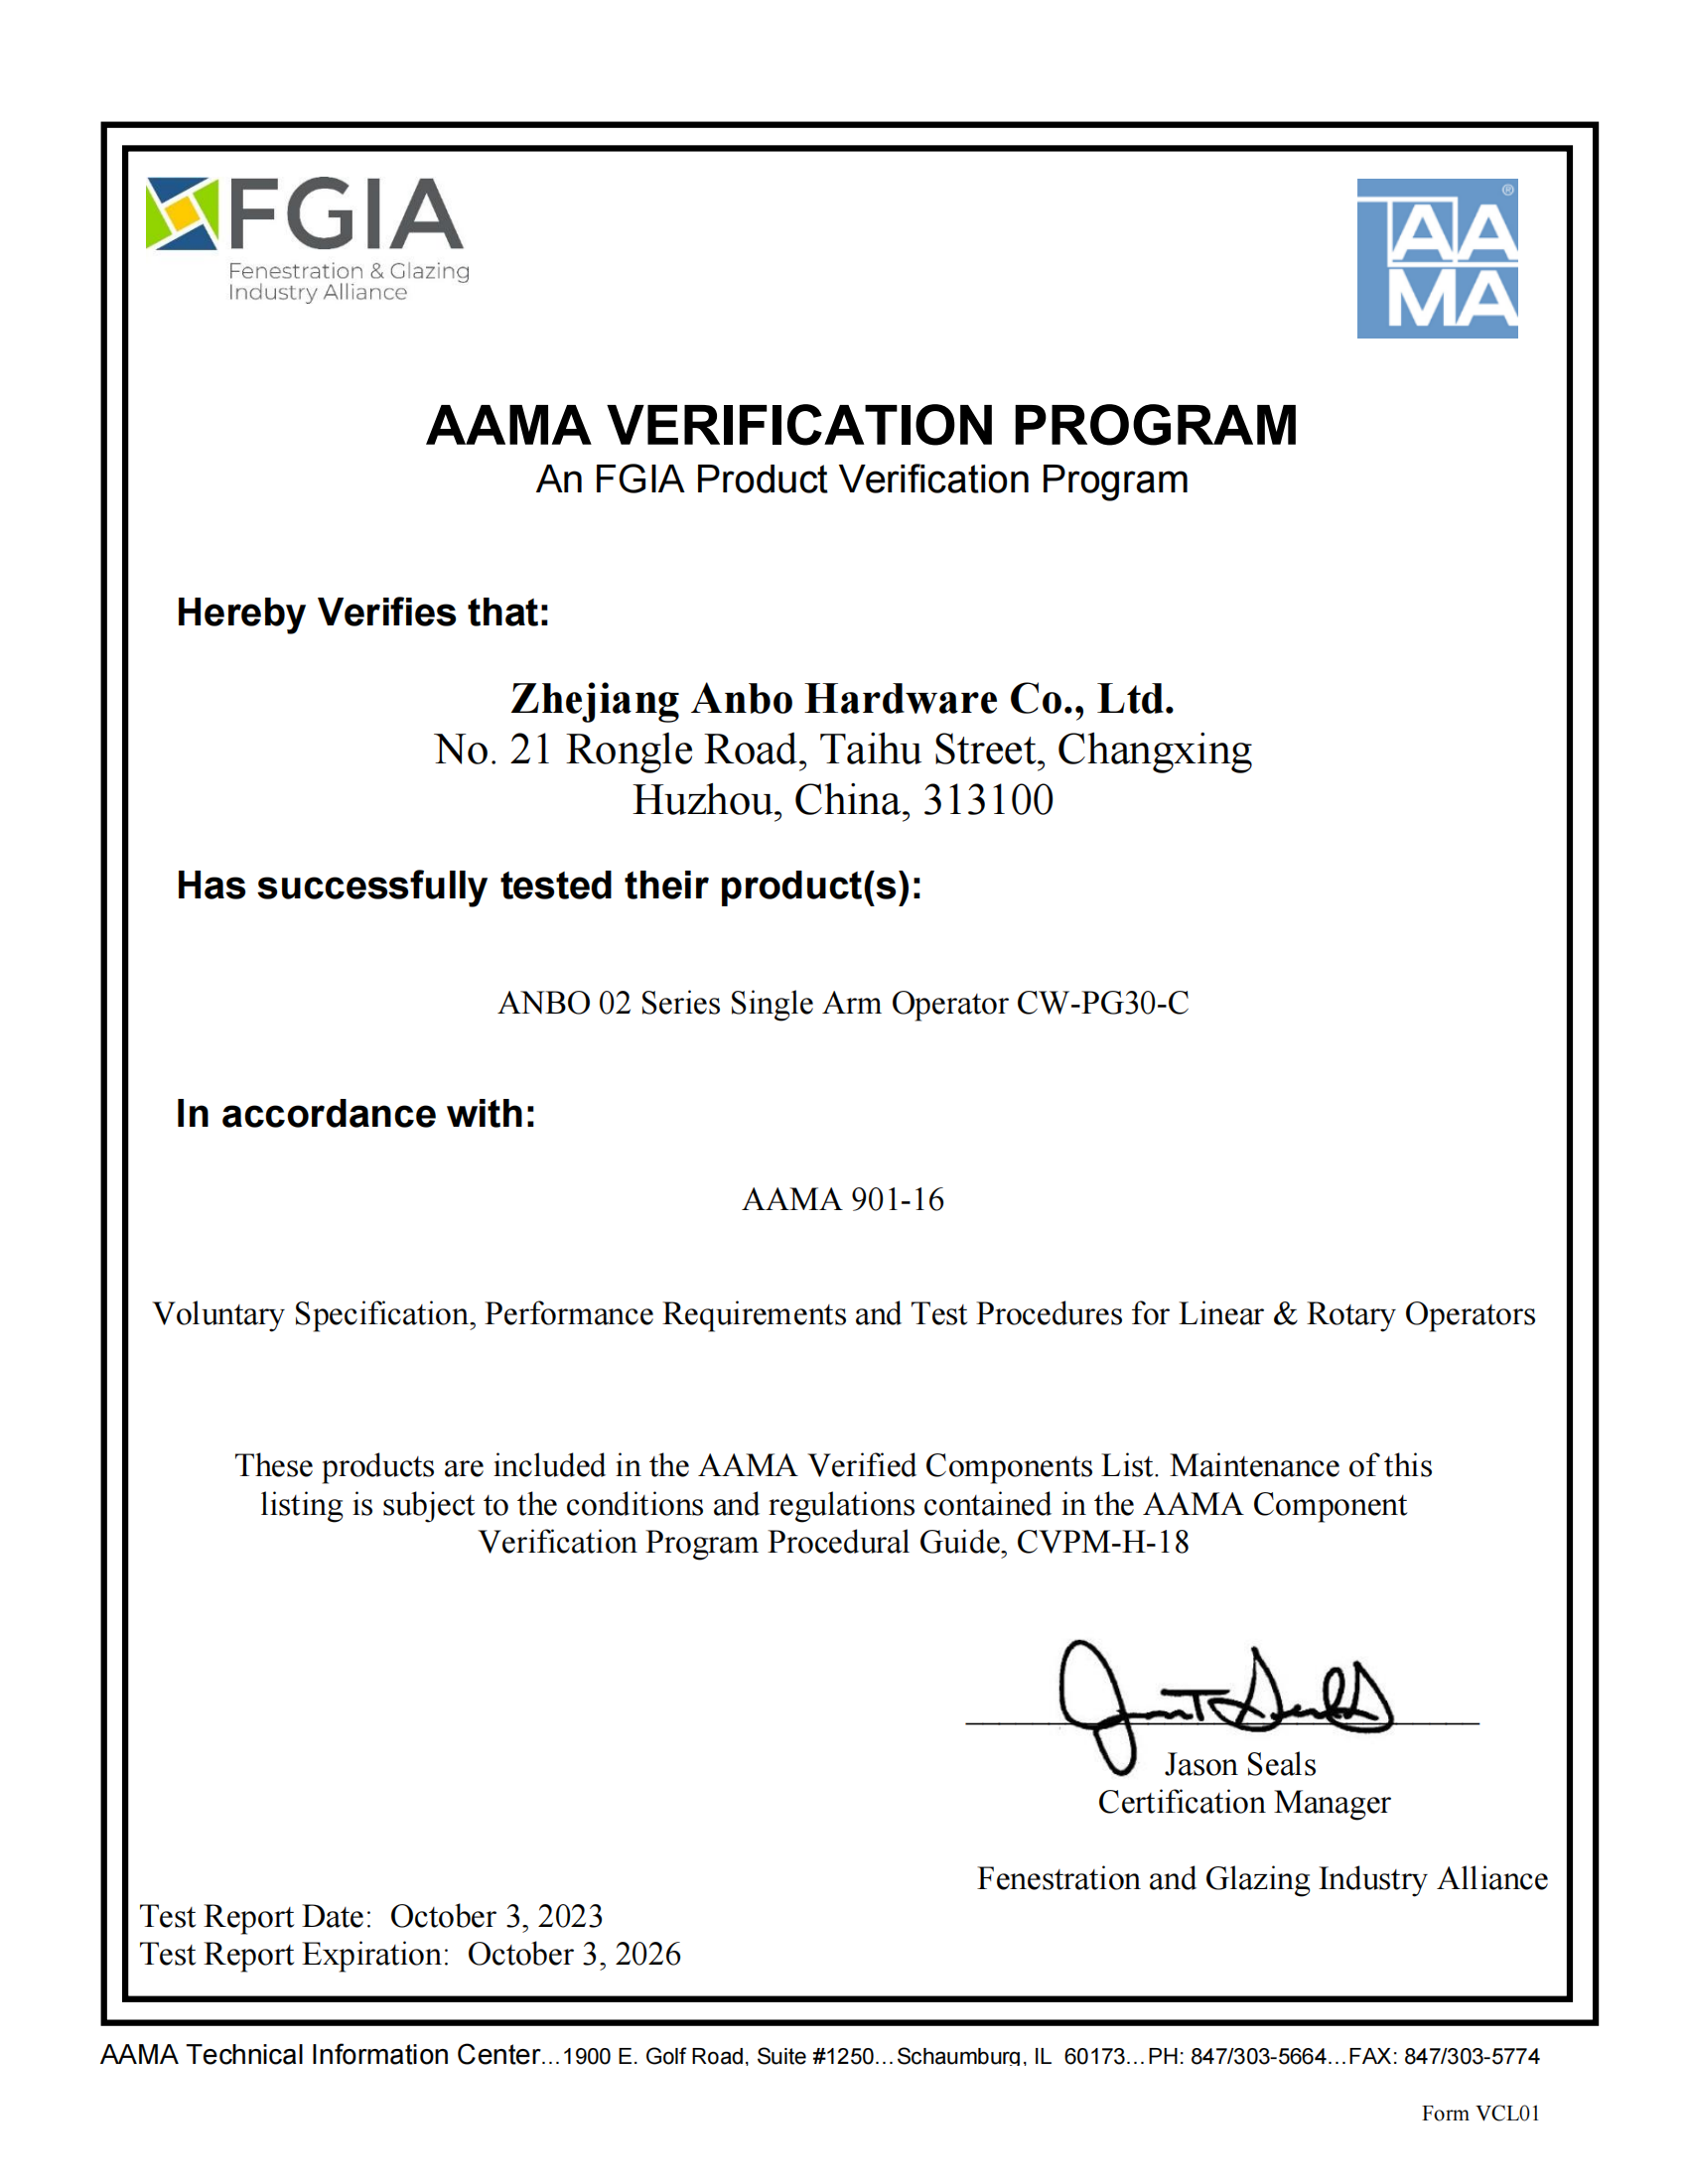 Successful Certification of Our Company's American Crank Openers through AAMA Verification Program